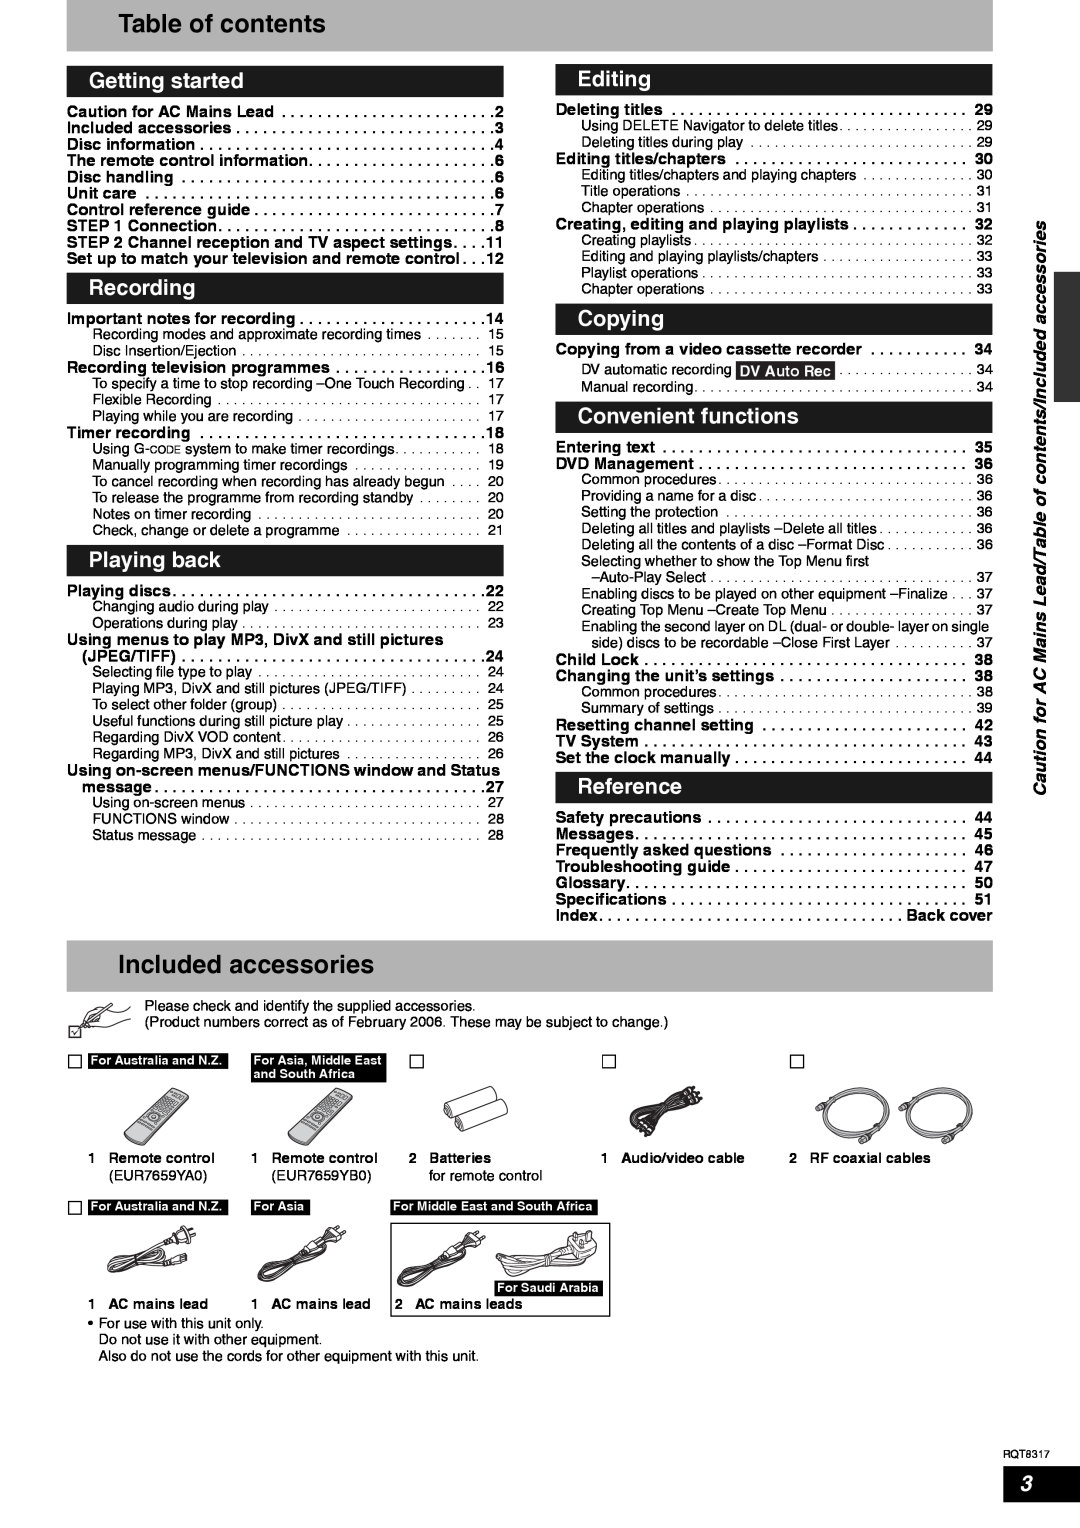 Panasonic DMR-ES15 Table of contents, Included accessories, Getting started, Recording, Playing back, Editing, Copying 